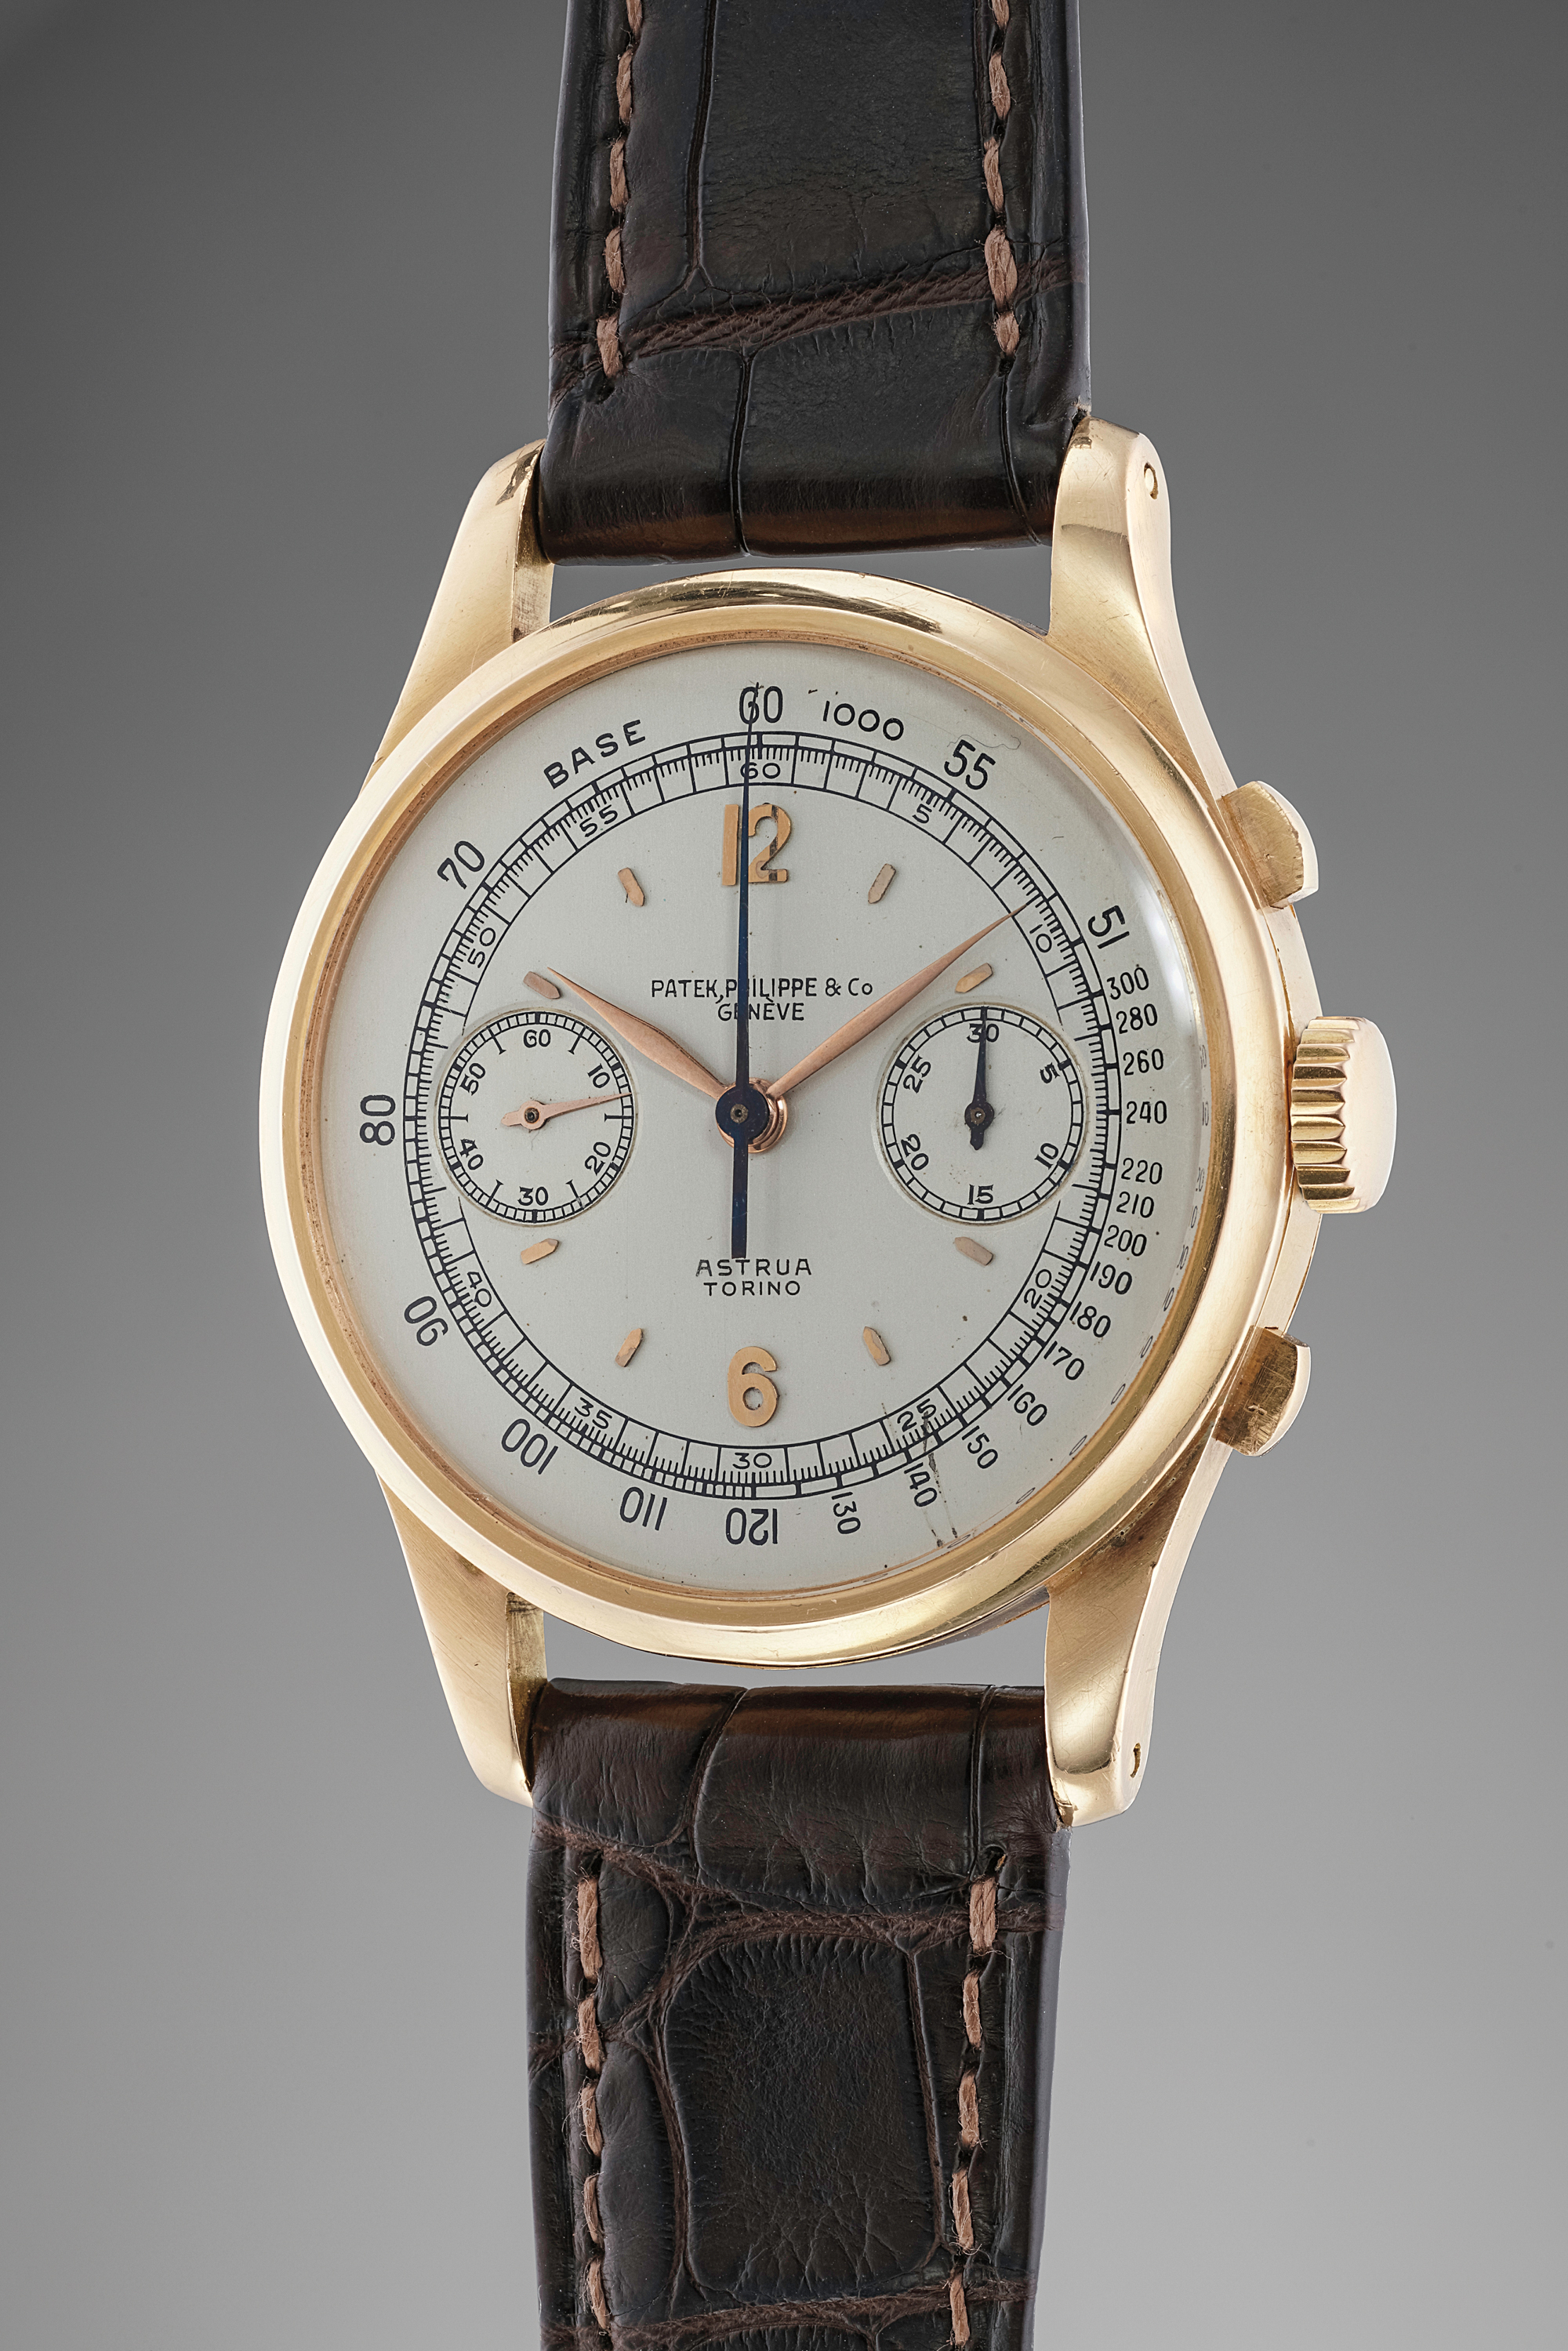 An extremely rare, large and very attractive pink gold chronograph wristwatch off-white dial retailed by Astrua Torino.